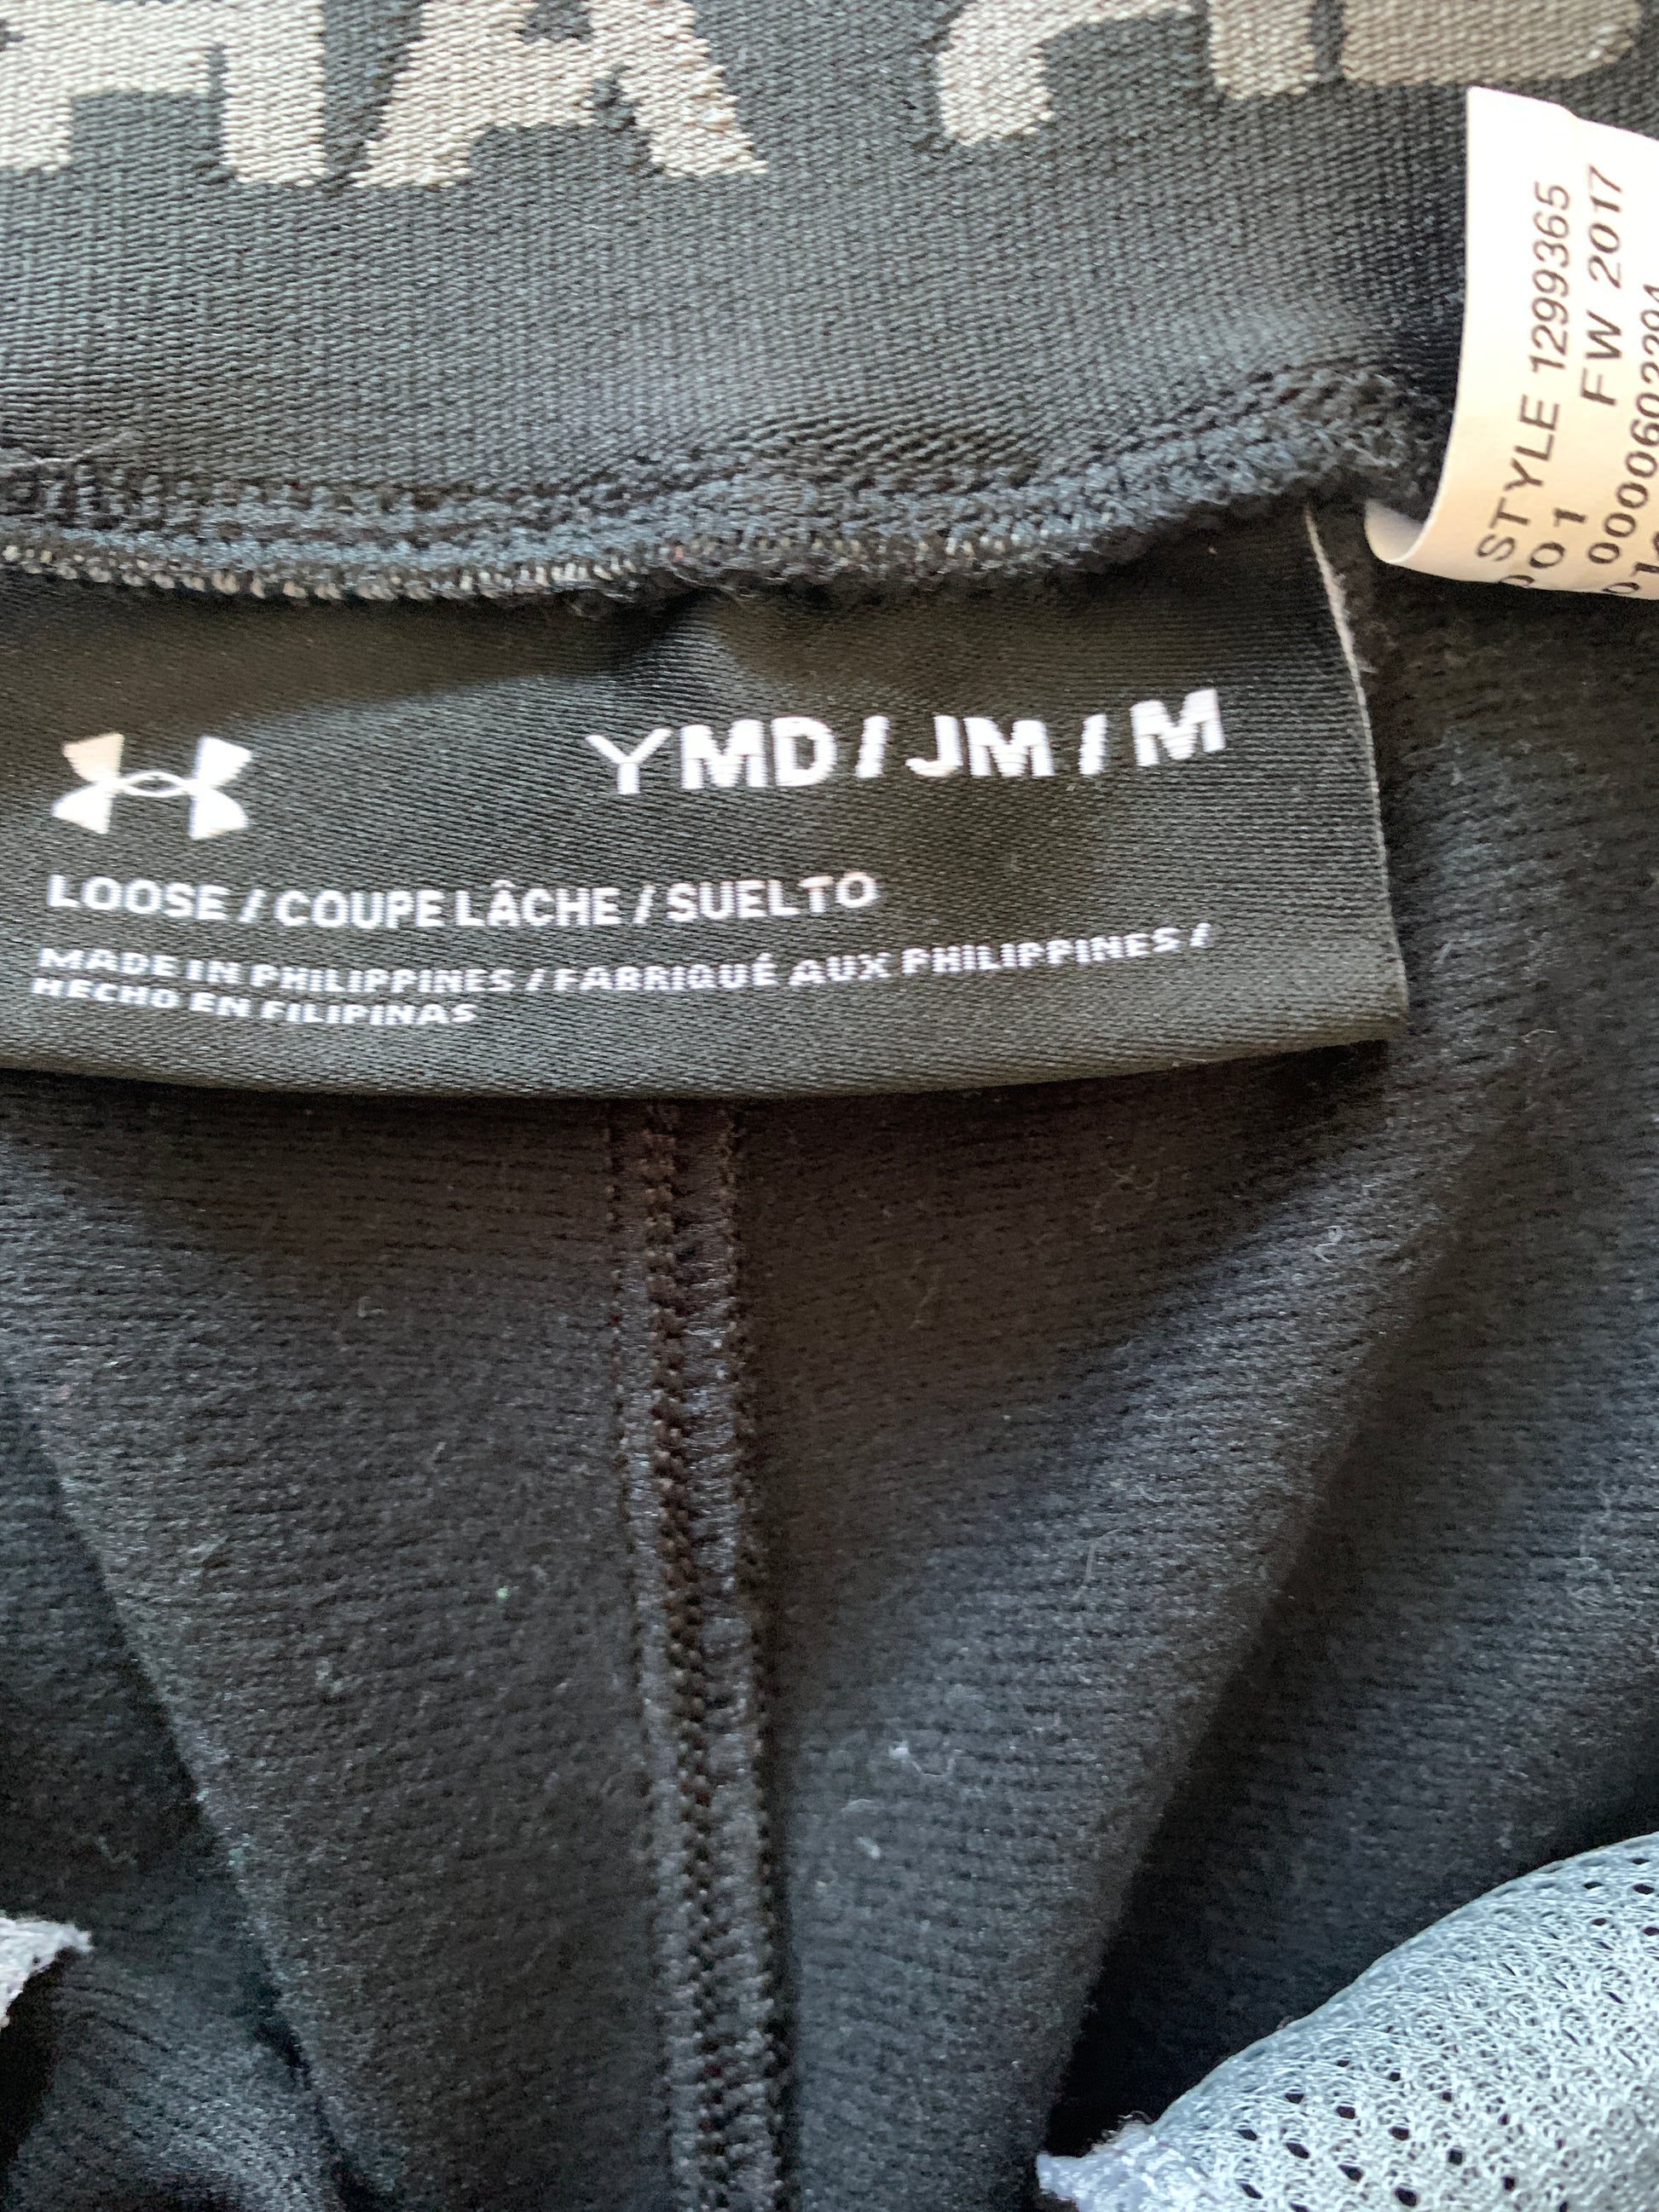 Under Armour Athletic Pants